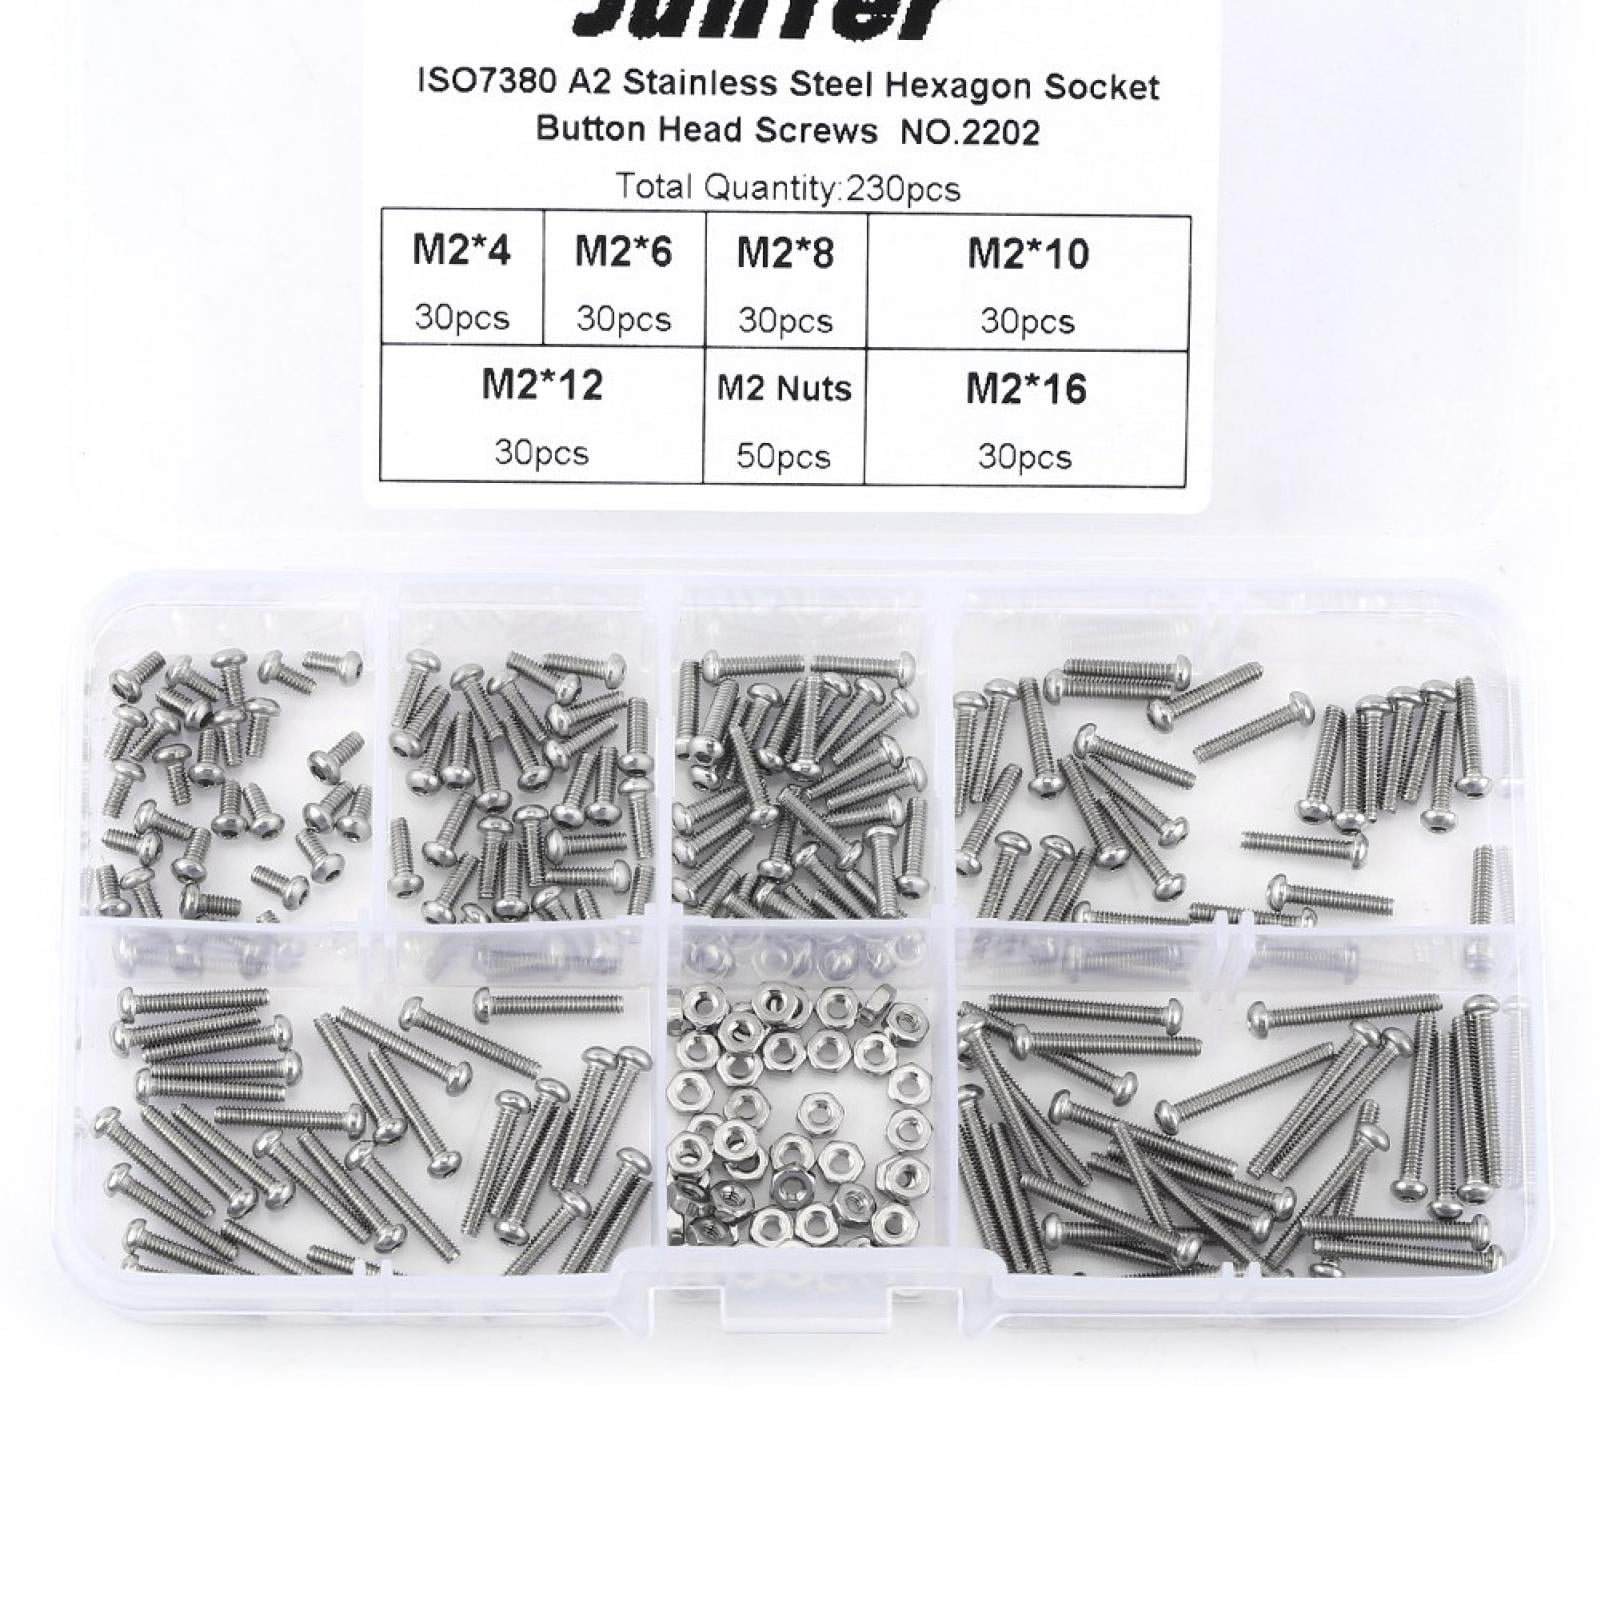 Details about   230pcs M2 Stainless Steel Hex Socket Button Head Screw Bolts Nuts Assortment NEW 